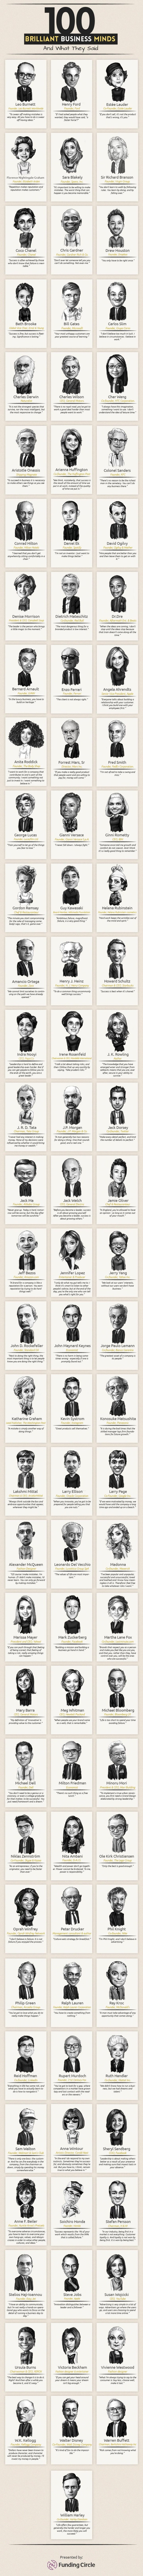 100 best quotes from top business leaders